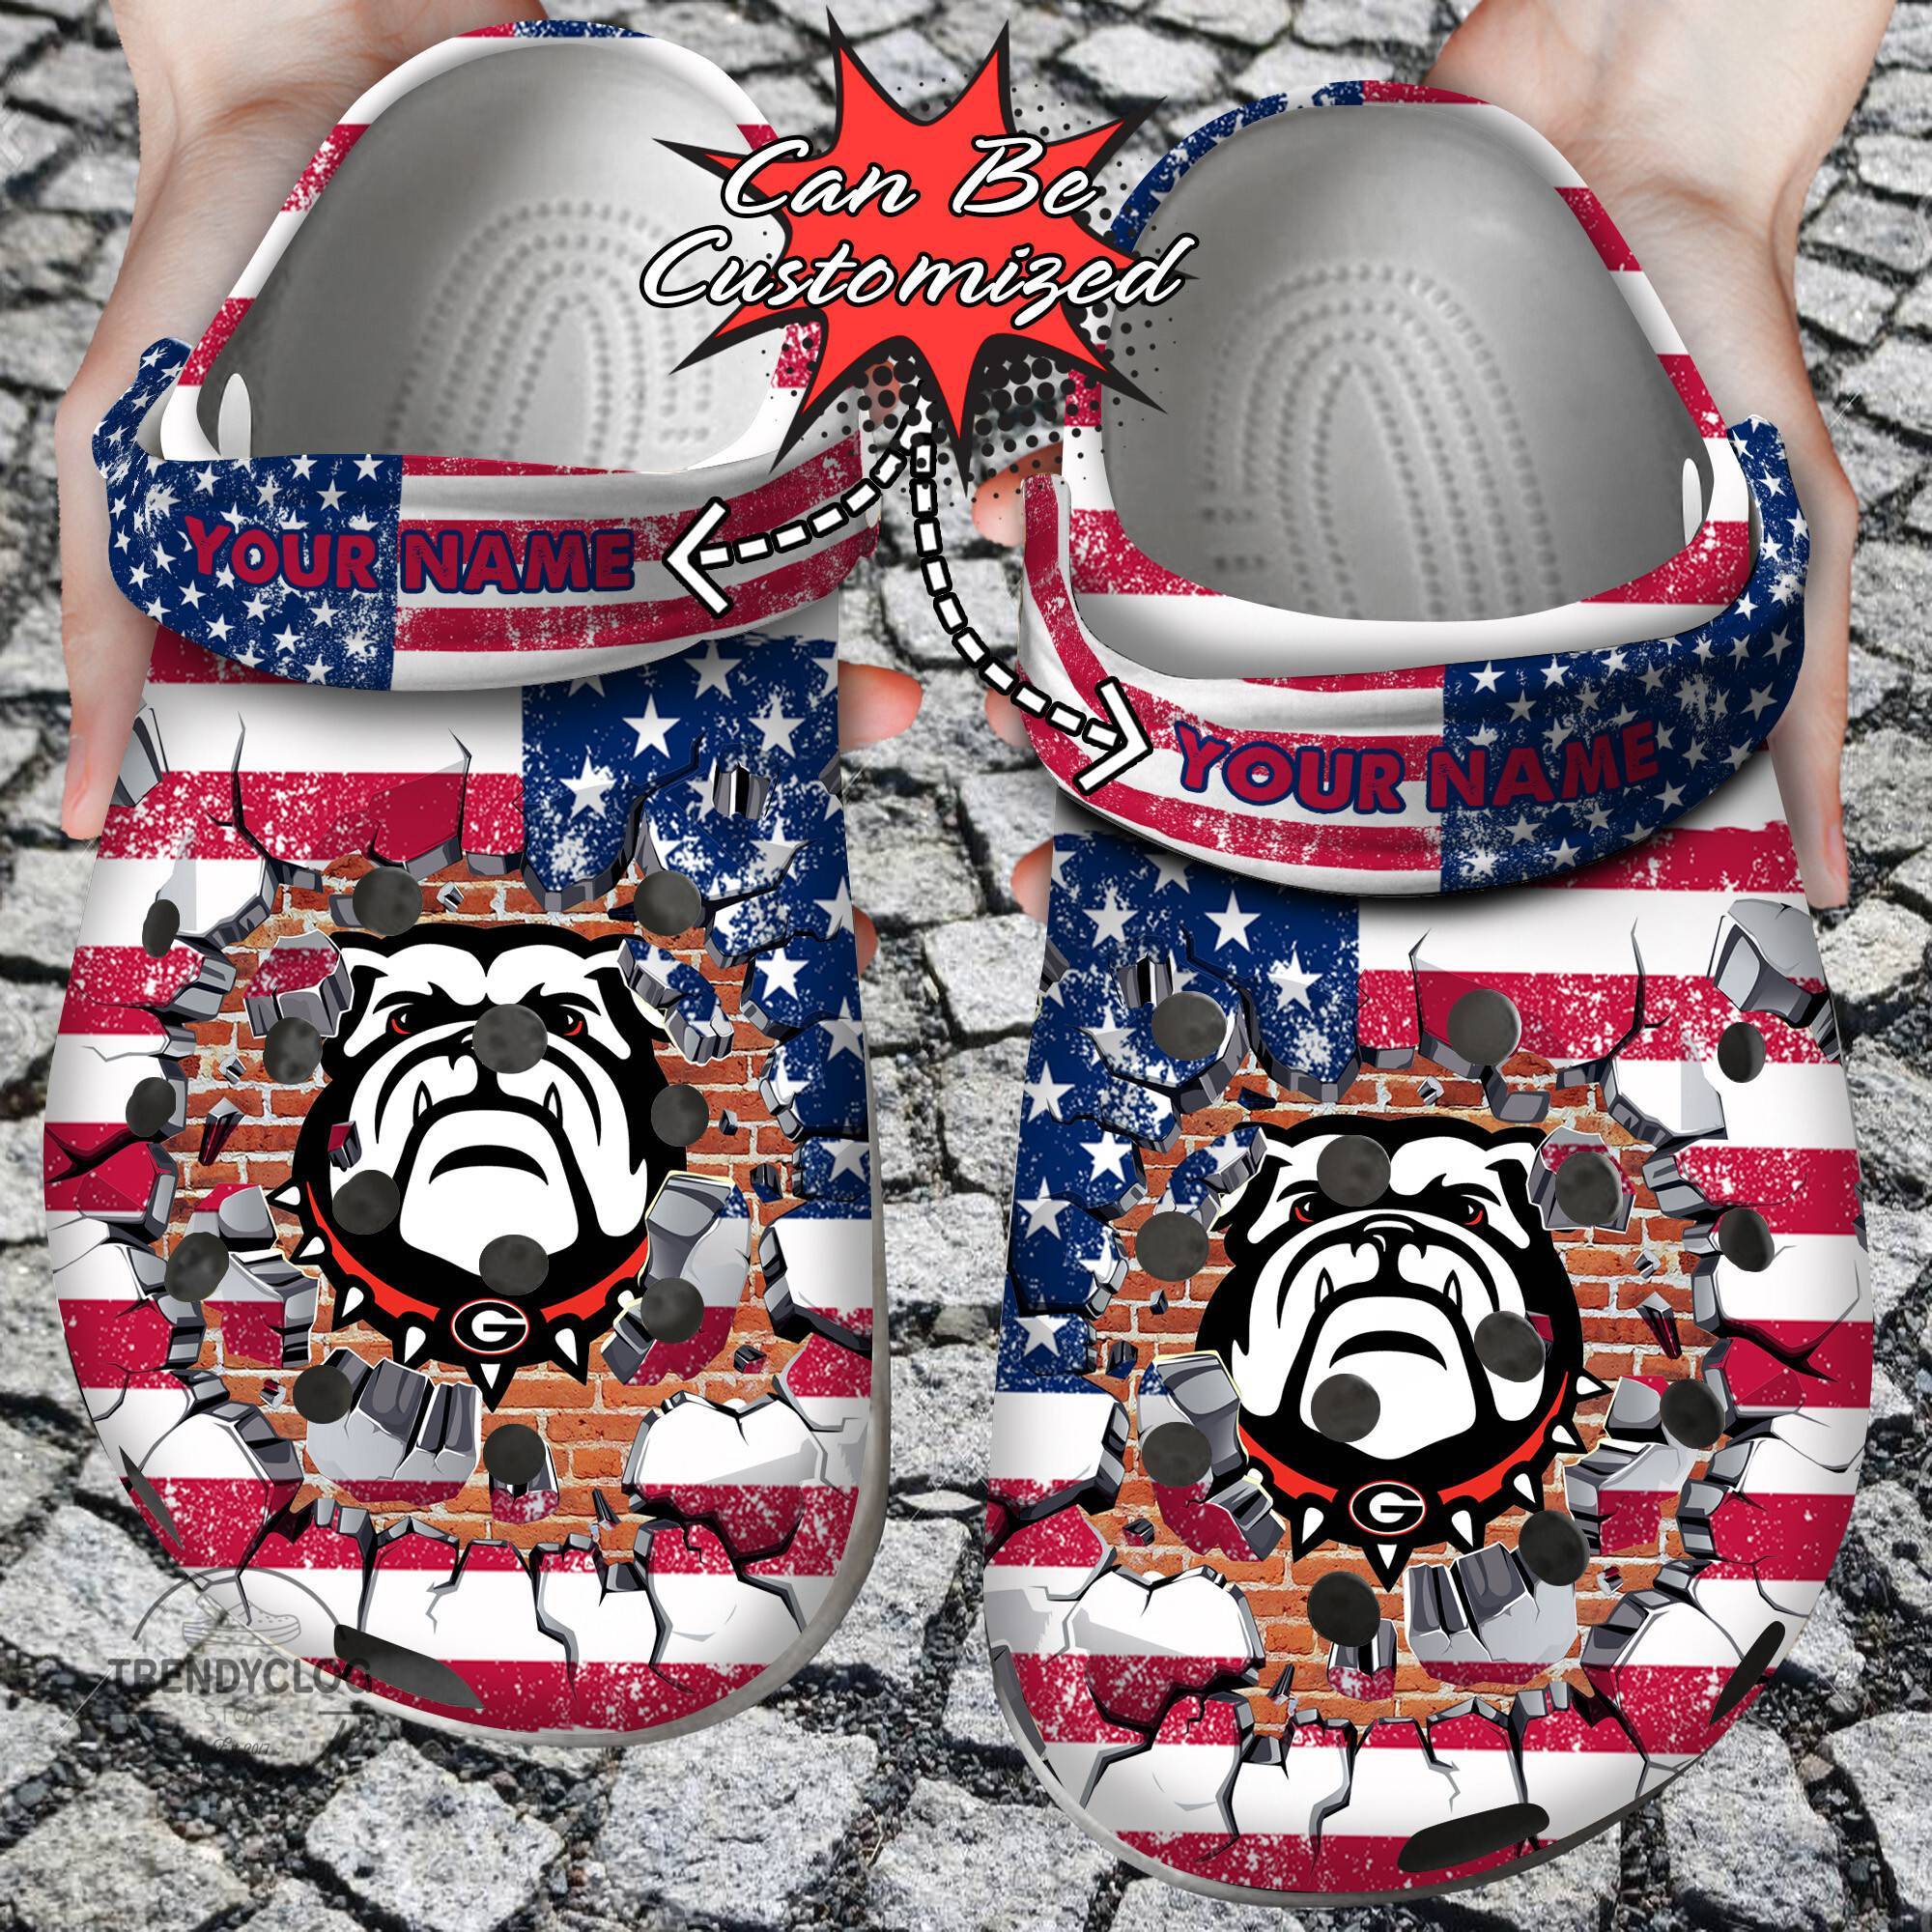 Sport Crocss Personalized GBulldogs University American Flag New Clog Shoes